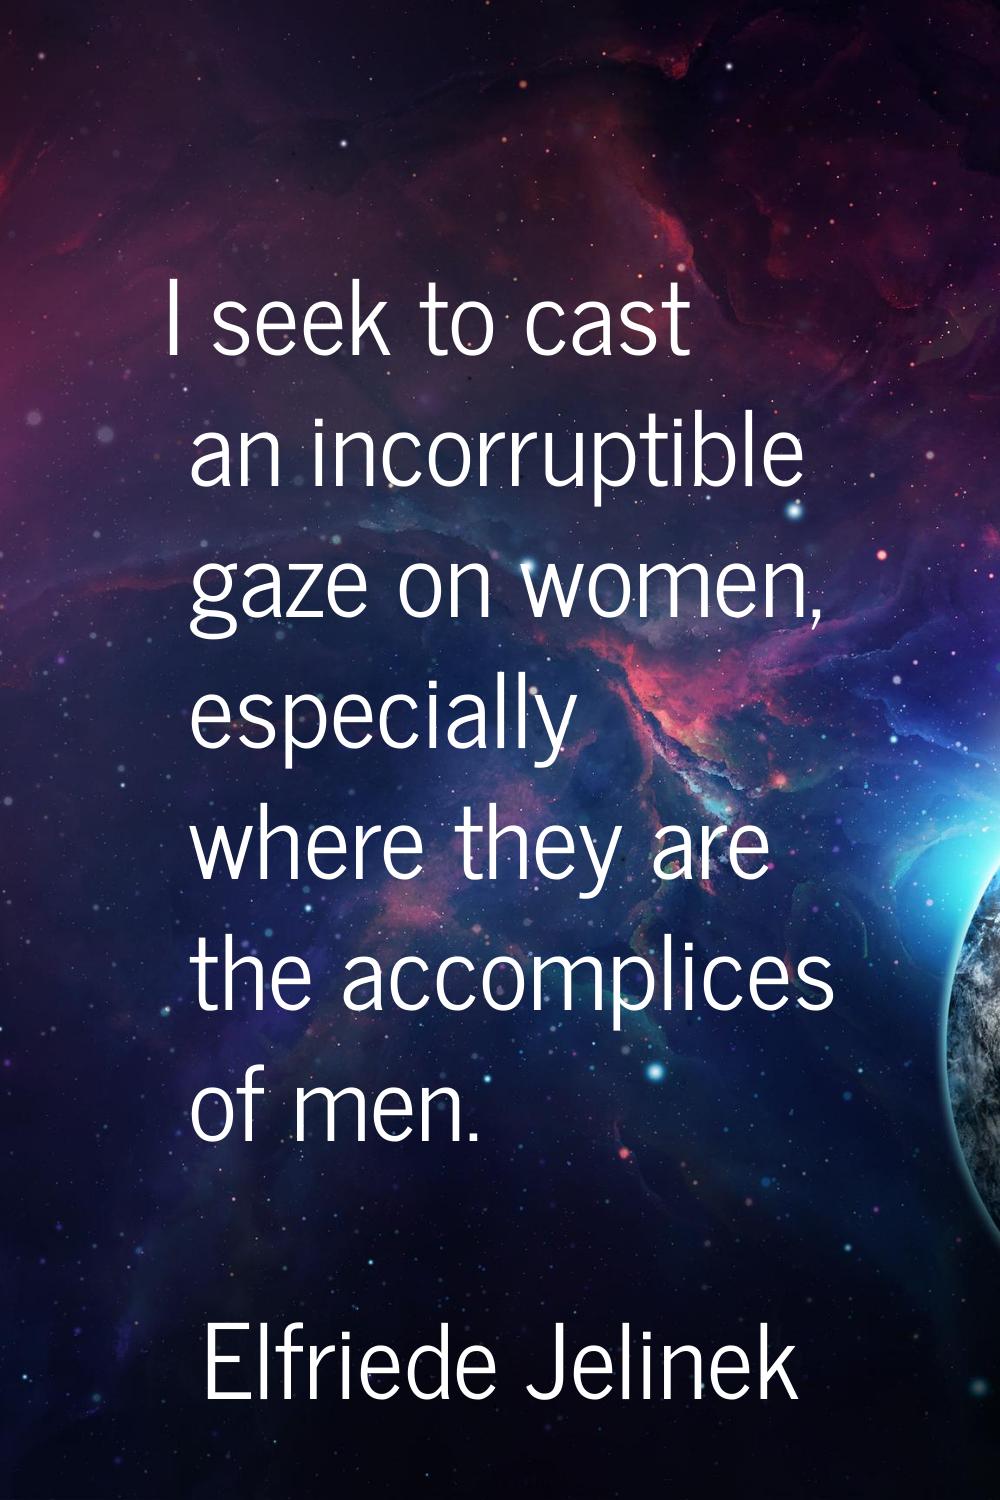 I seek to cast an incorruptible gaze on women, especially where they are the accomplices of men.